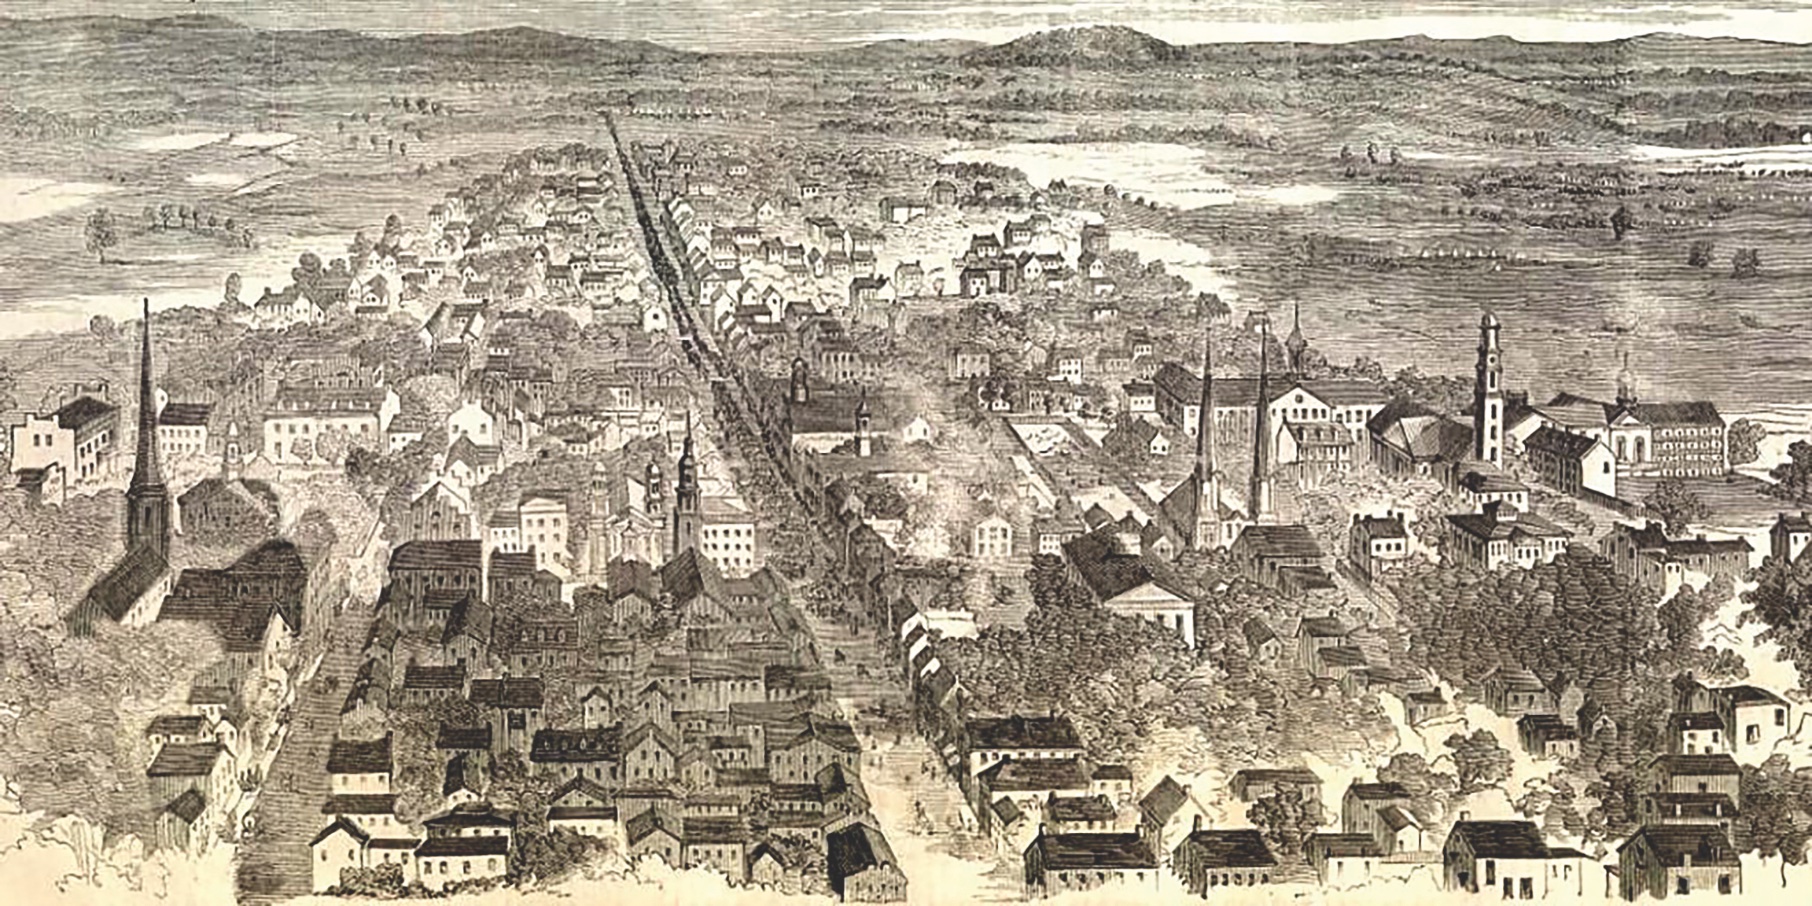 A Harper’s Weekly sketch of downtown Frederick. The twin spires of the Evangelical Lutheran Church can be seen. (Harper’s Weekly)